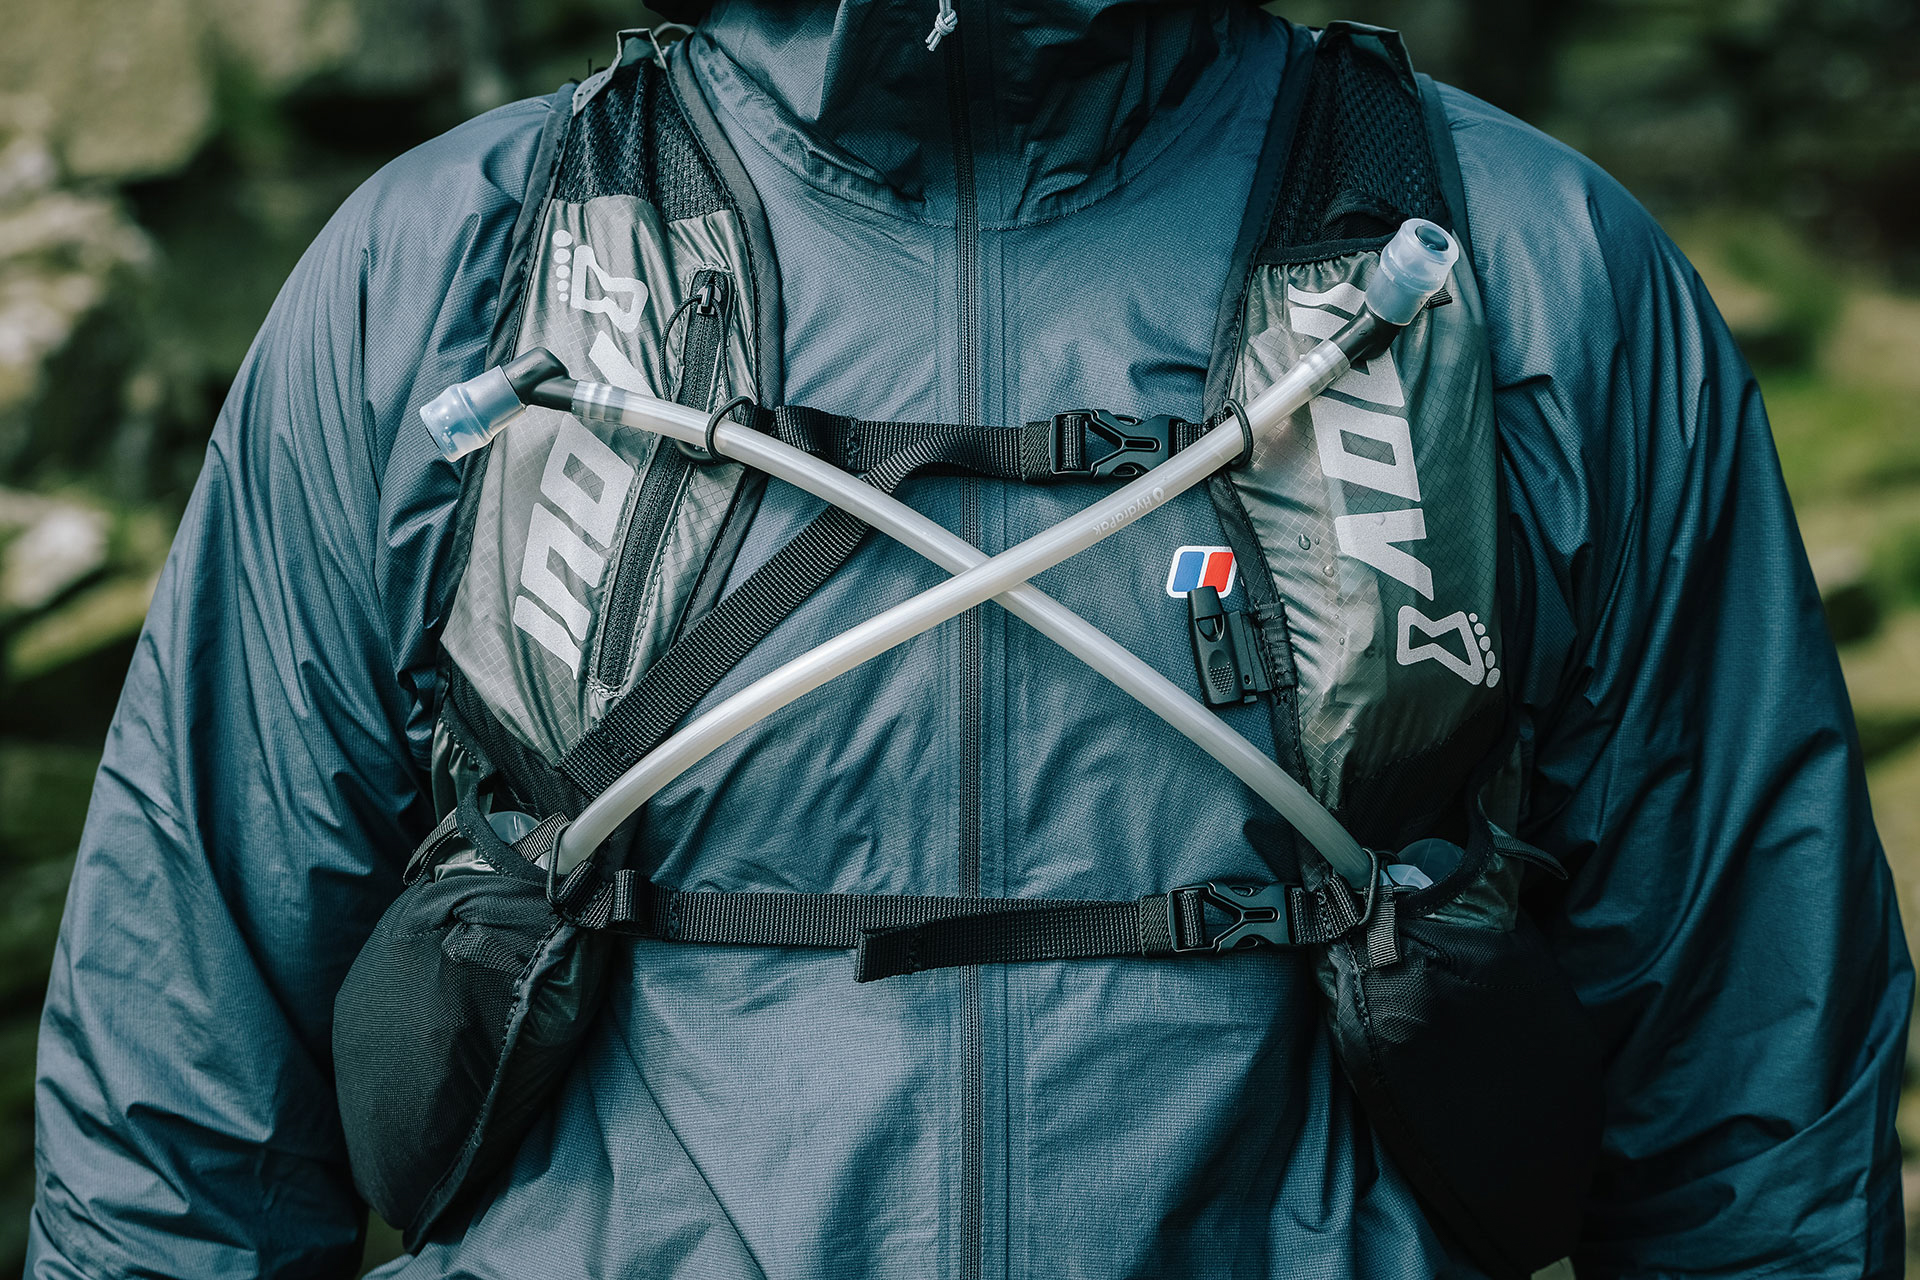 Inov-8 All-Terrain Pro Vest 0-15 | Review - Outdoors